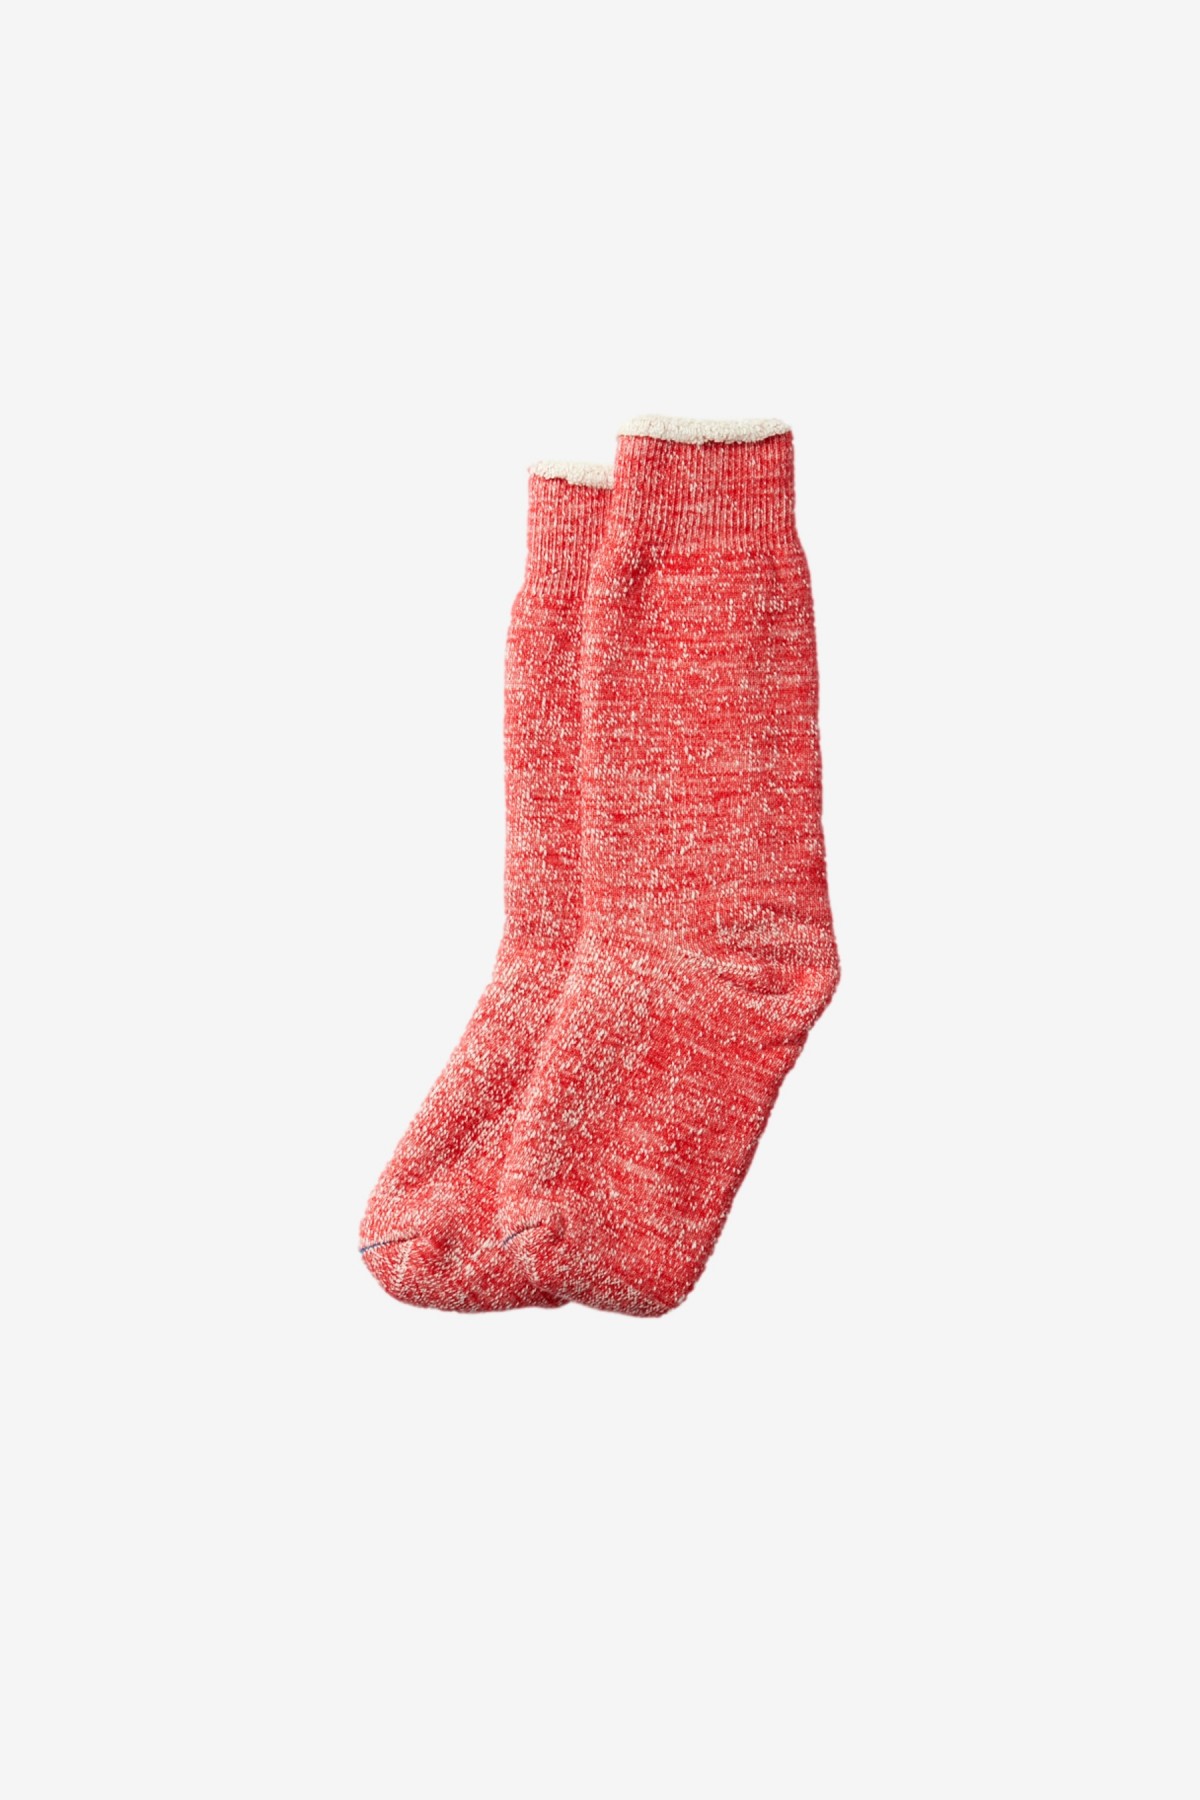 RoToTo Double Face Socks in Red